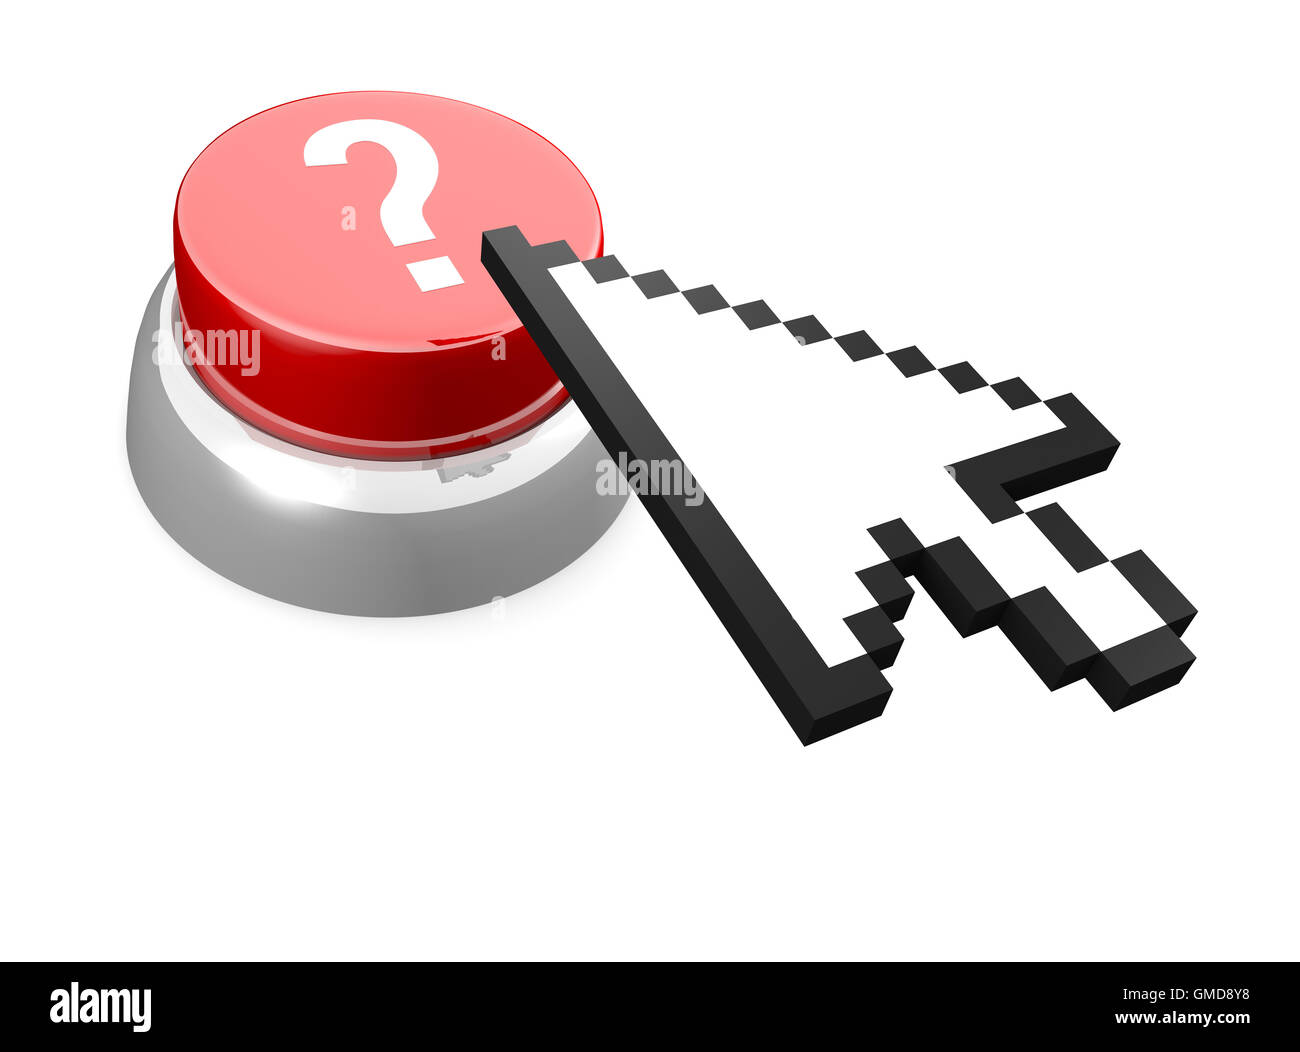 Red button with question mark Stock Photo